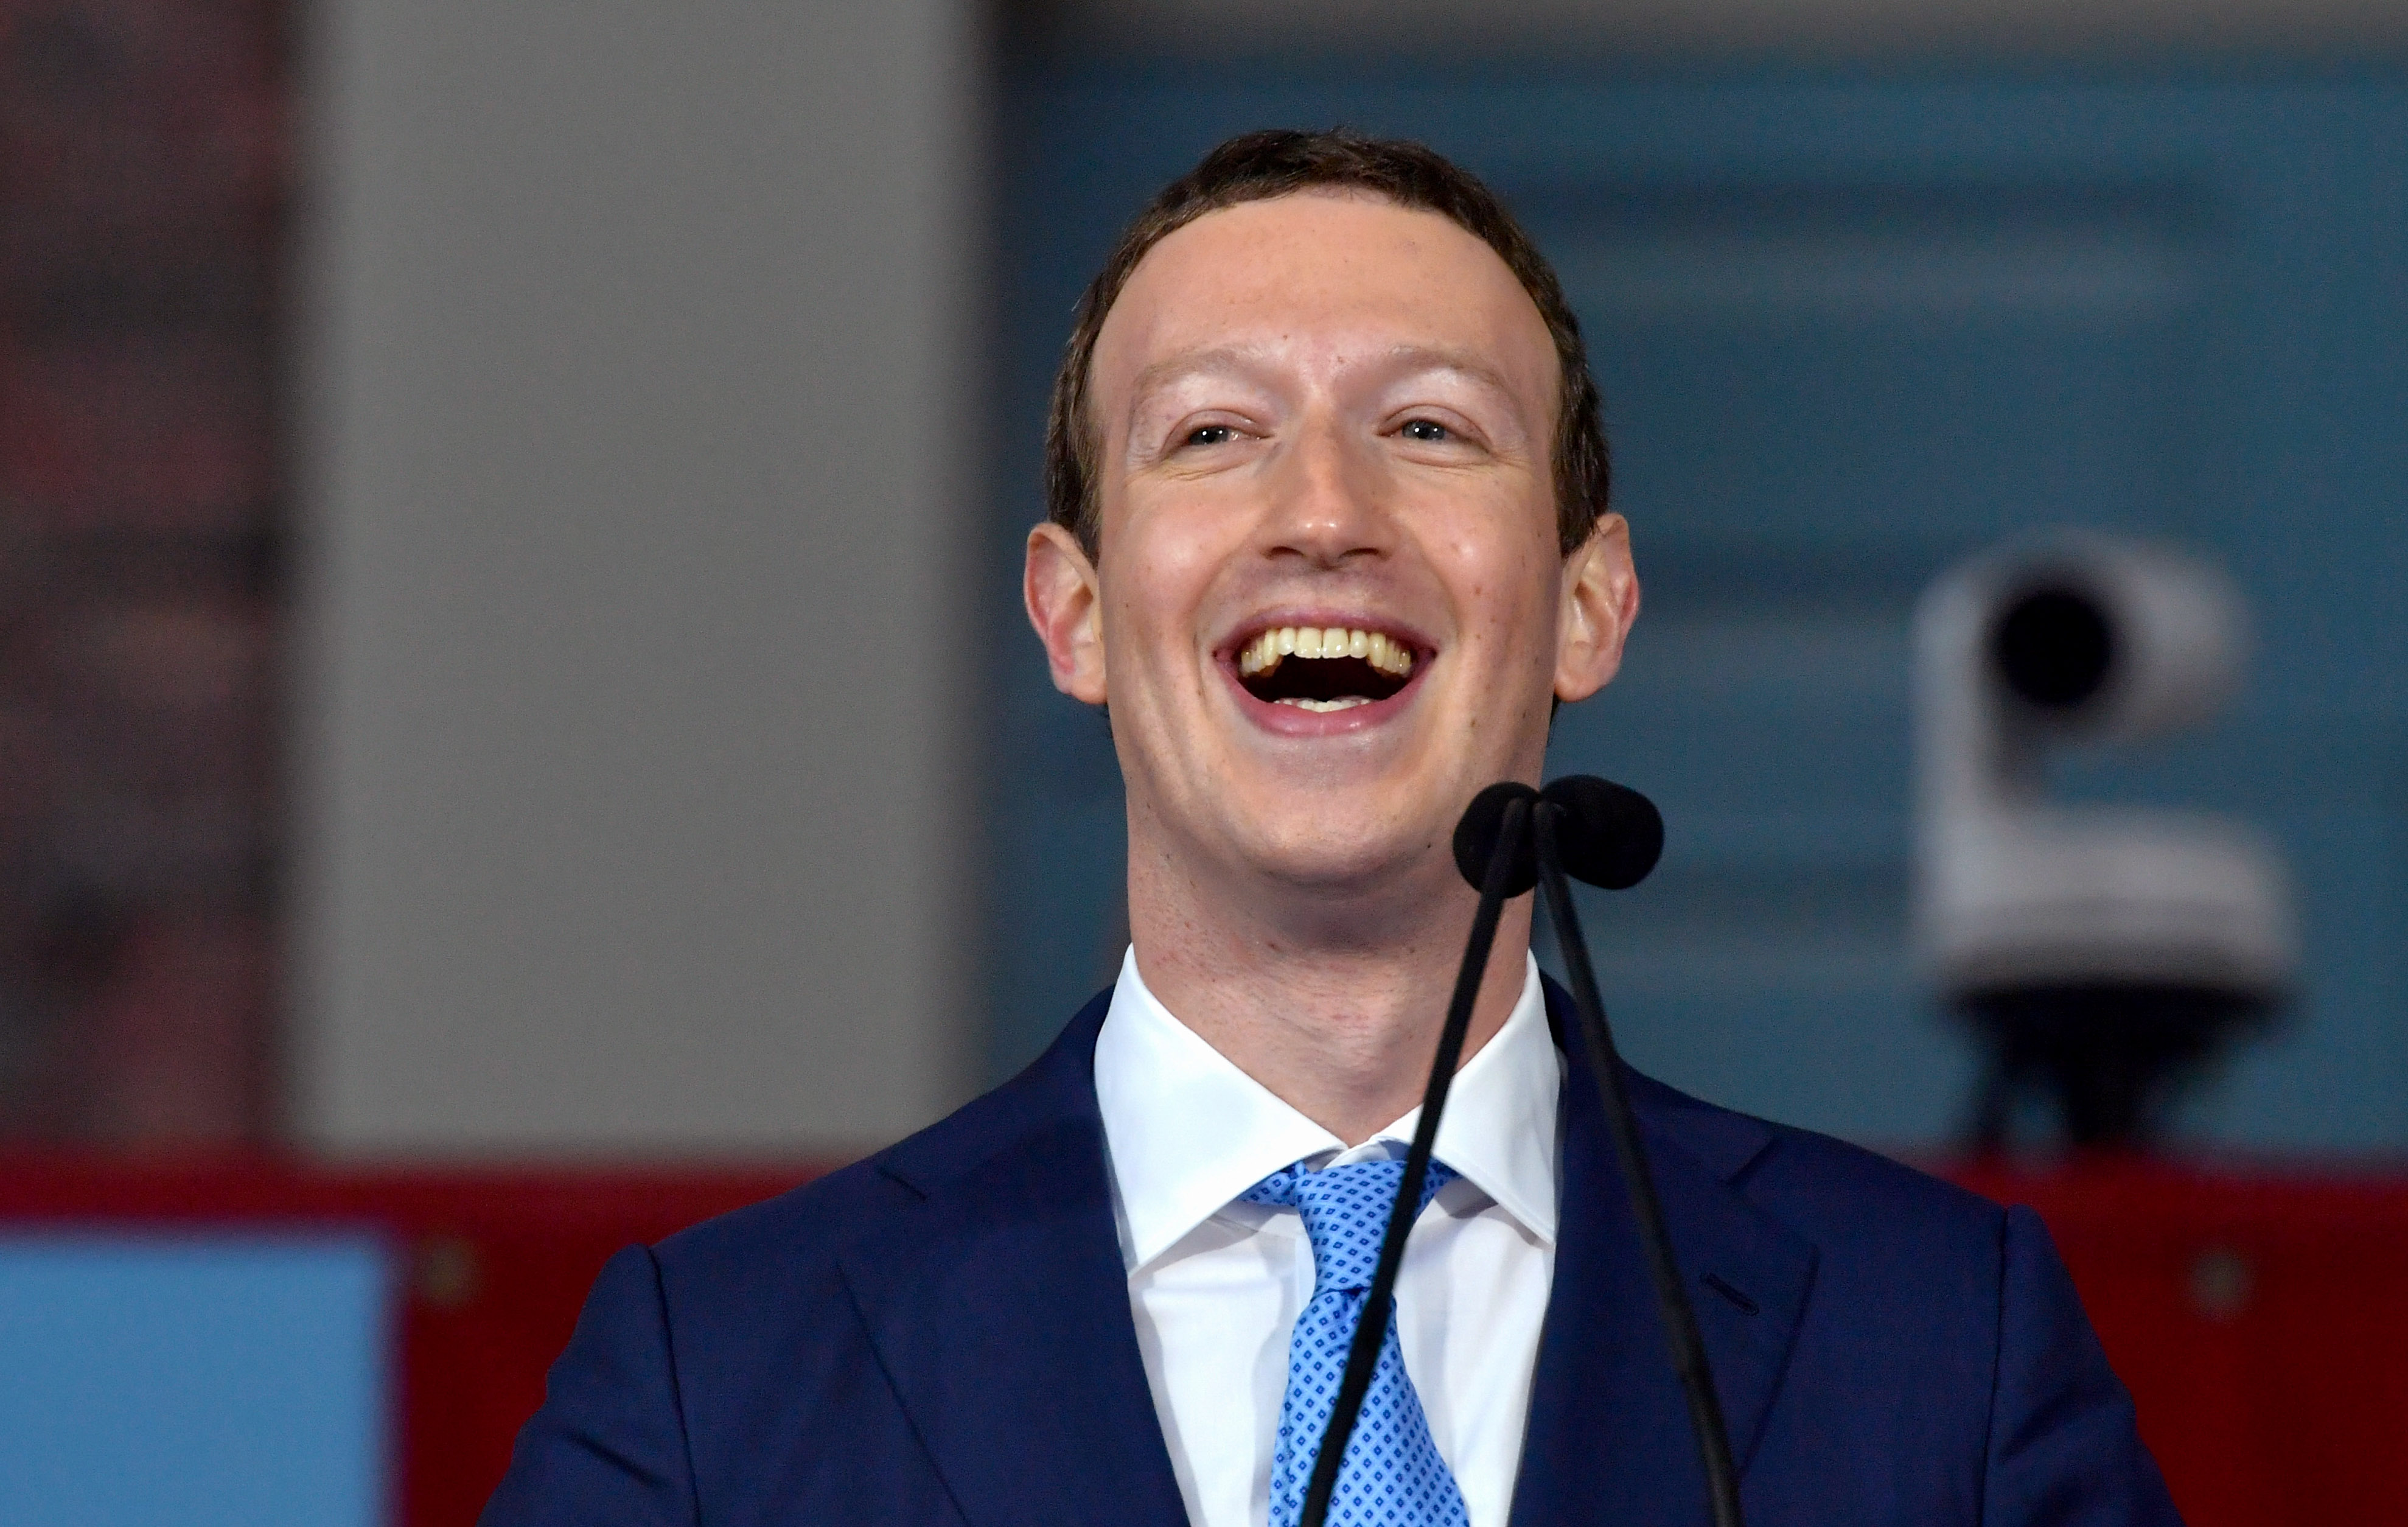 Mark Zuckerberg Just Became the World's Fifth Richest Person